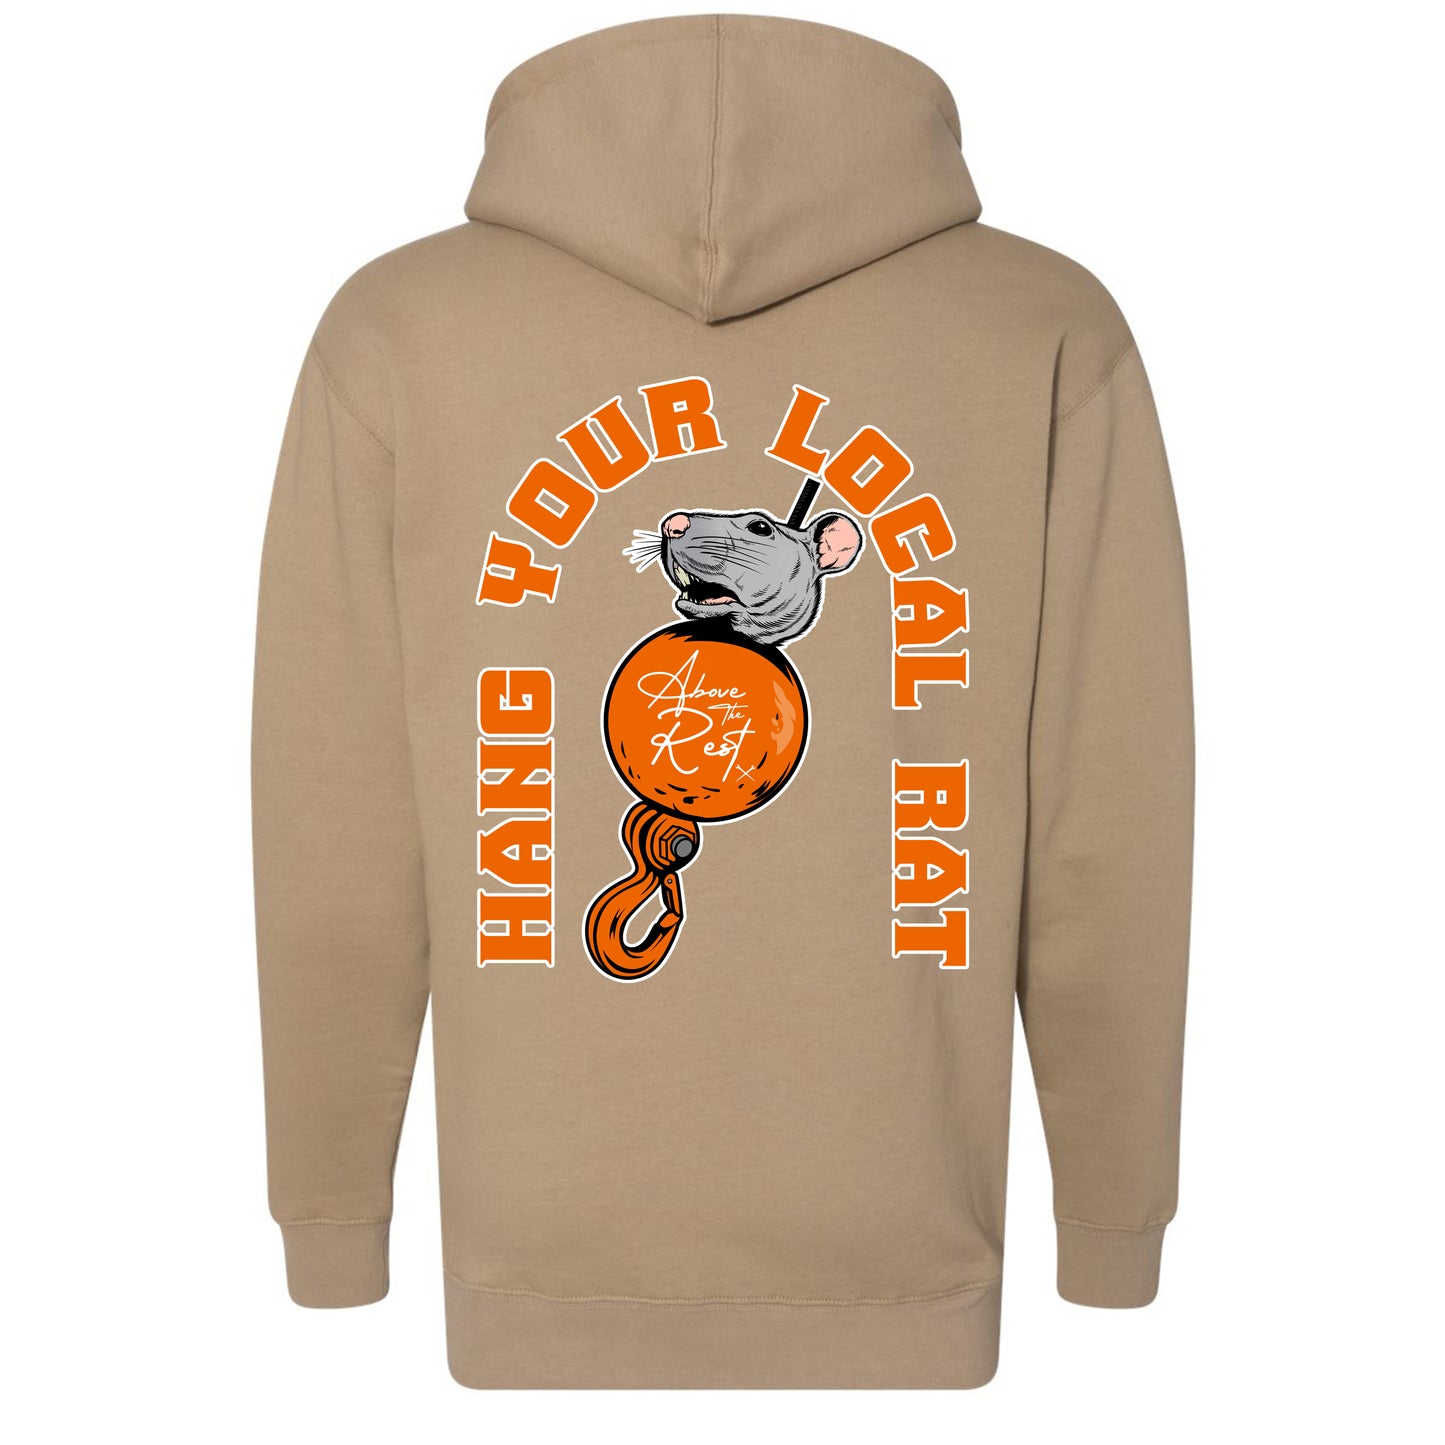 HANG YOUR LOCAL RAT PULLOVER HOODIE